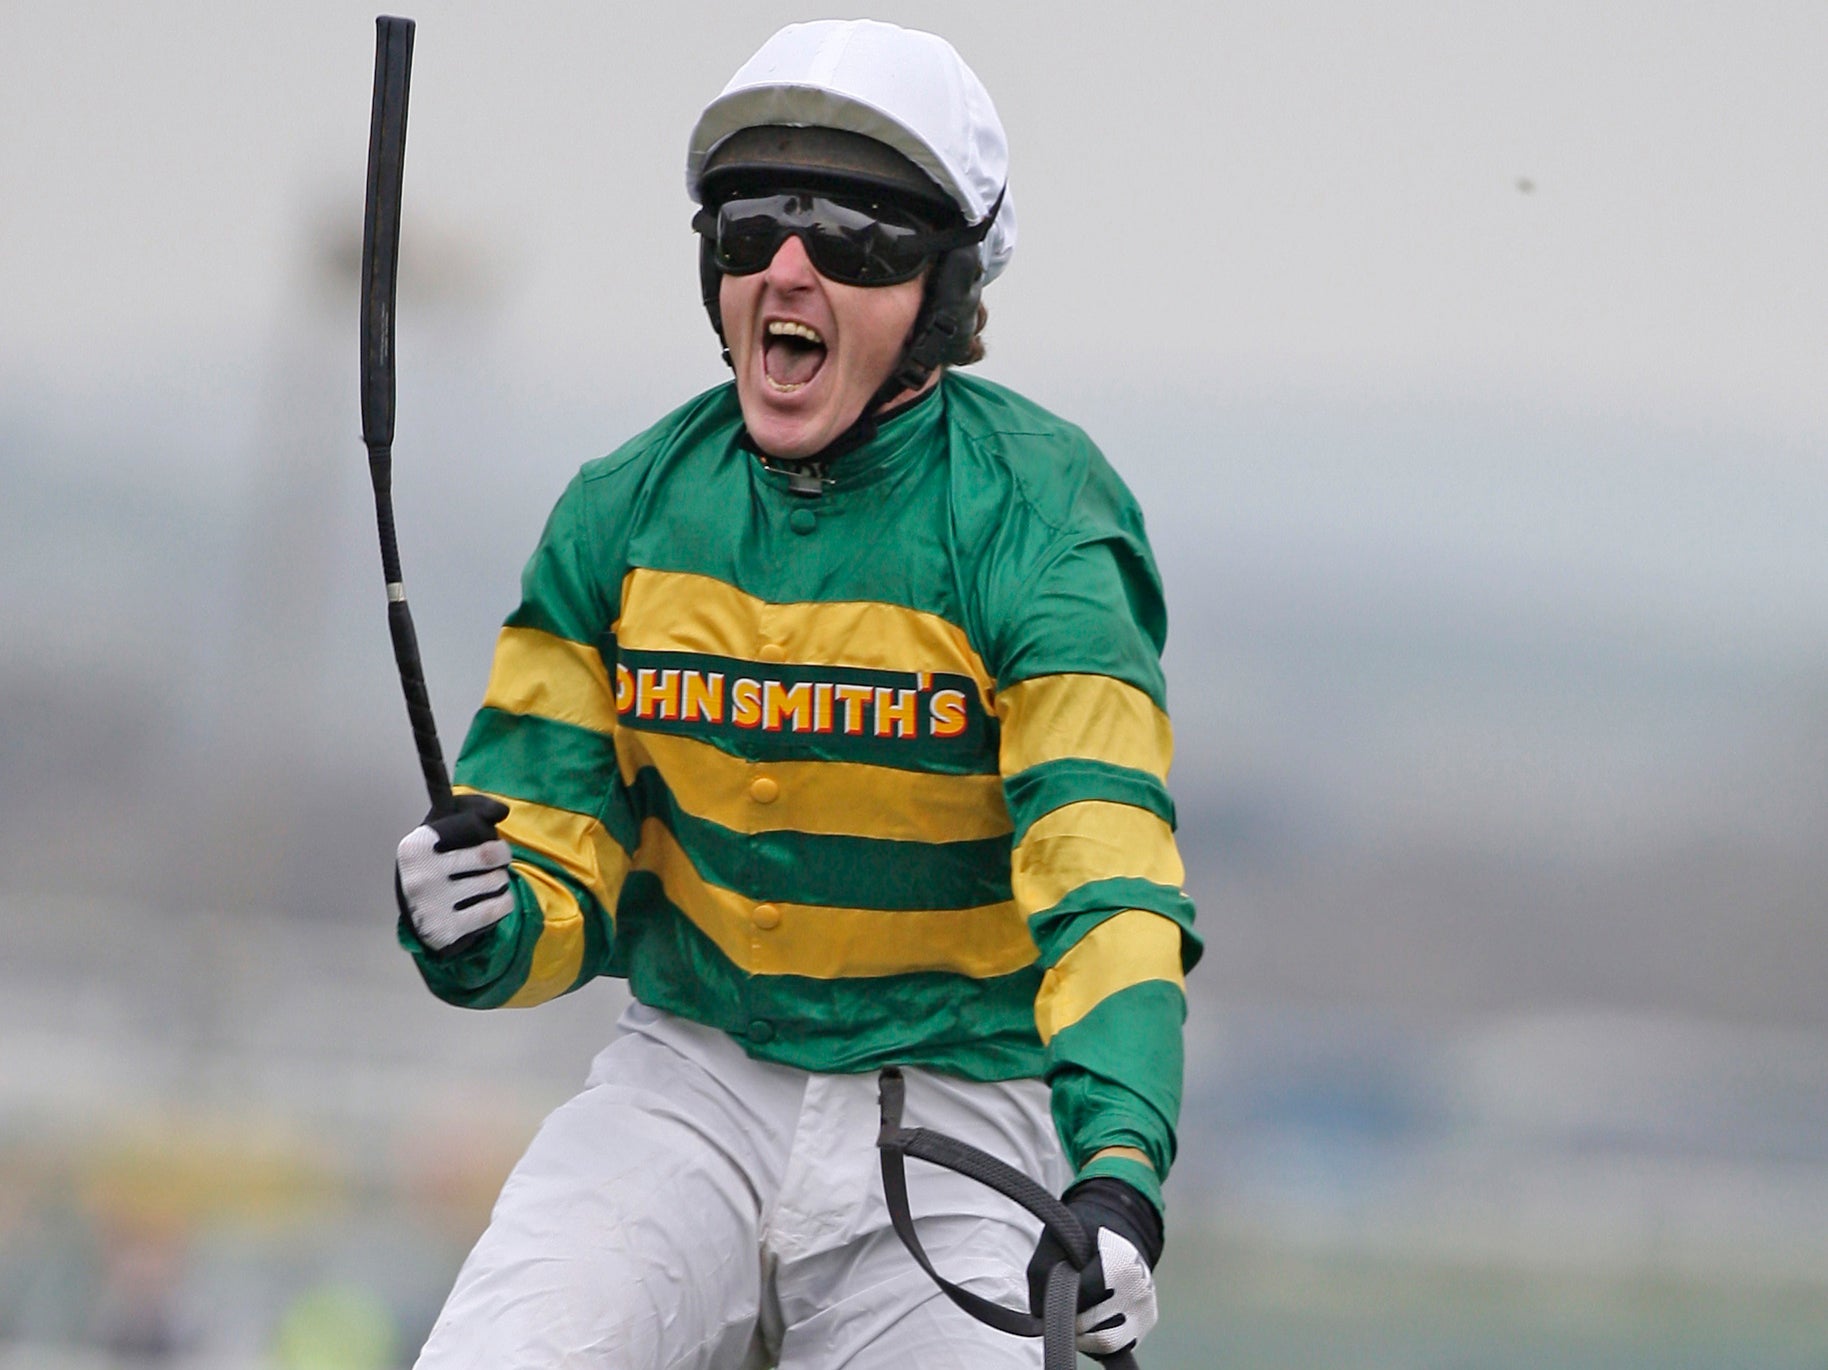 AP McCoy celebrates winning the Grand National in 2010 atop Don’t Push It